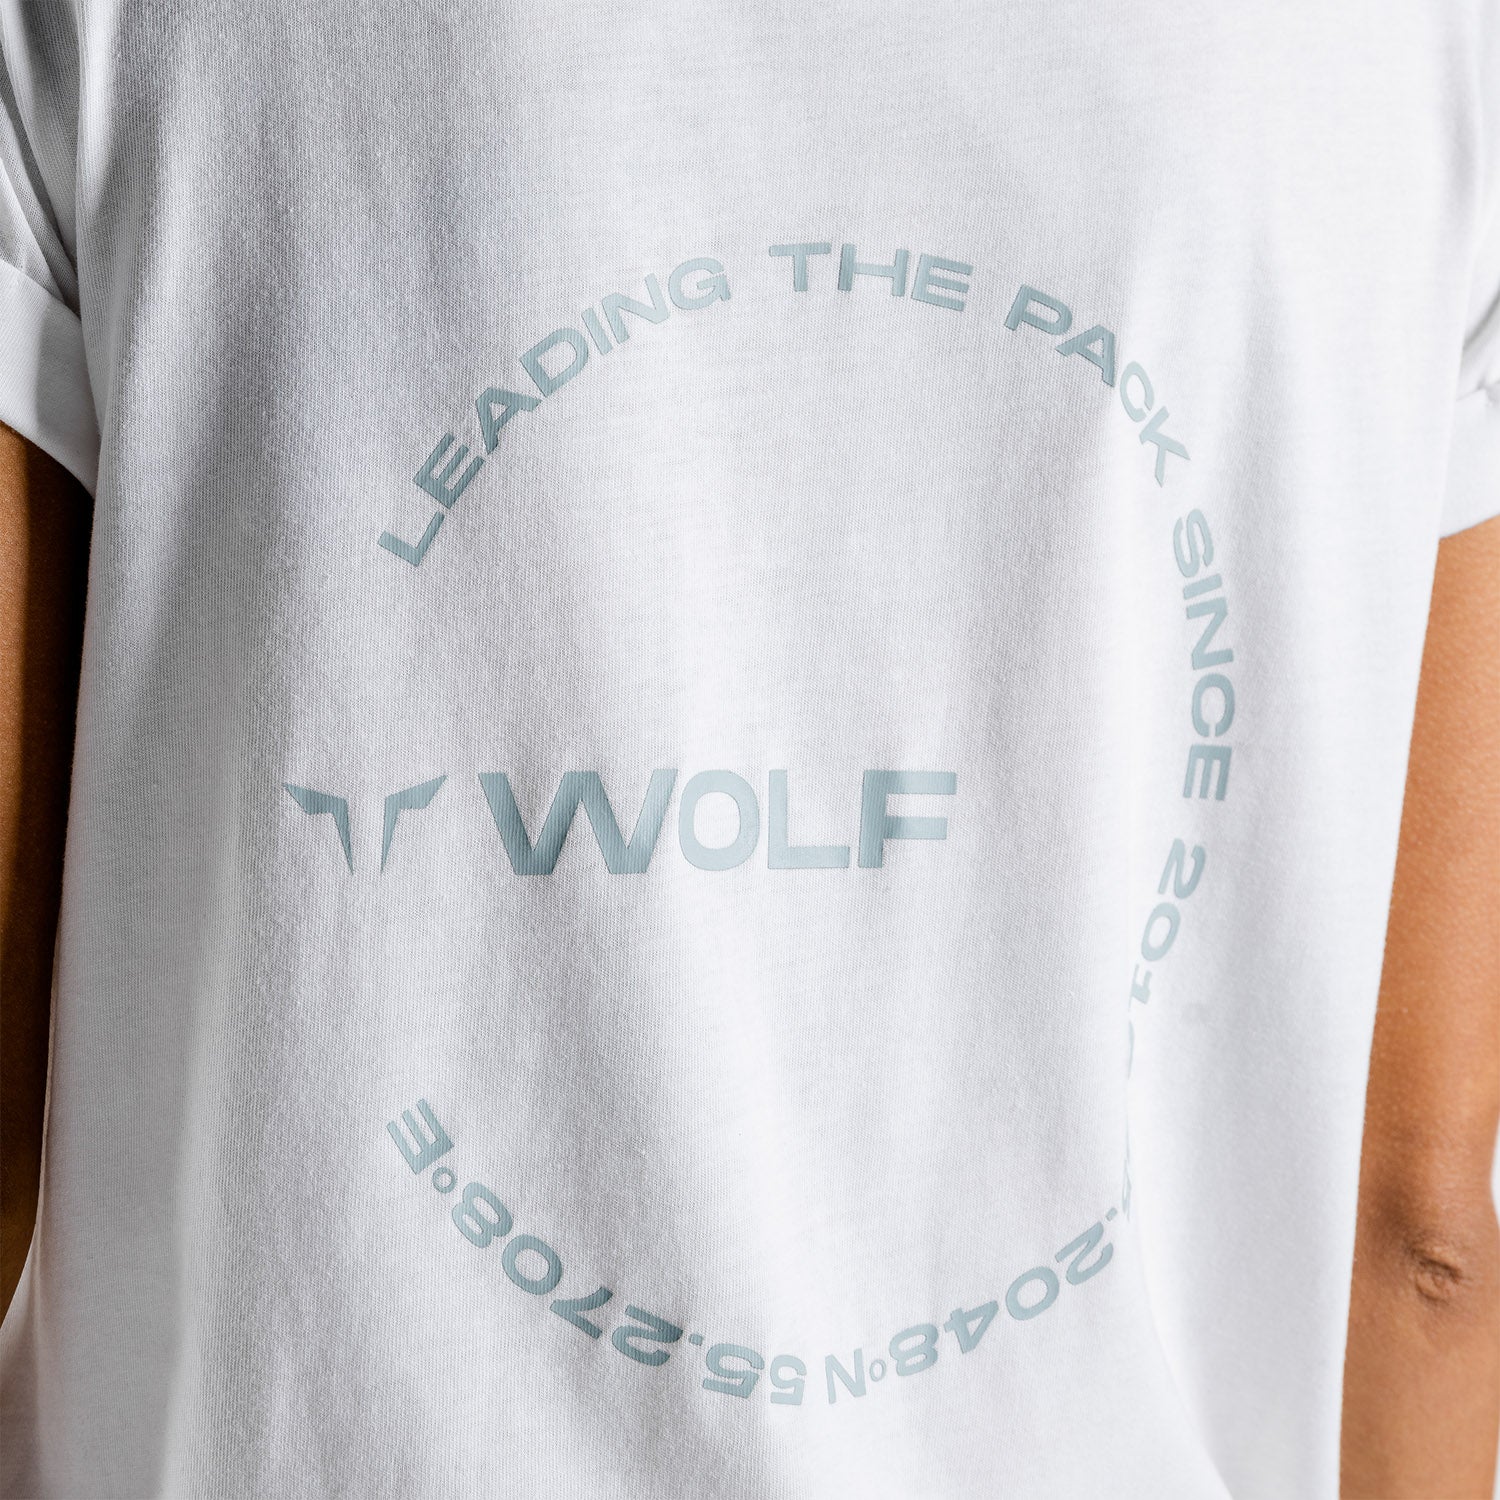 squatwolf-gym-t-shirts-for-women-luxe-oversize-tee-white-workout-clothes